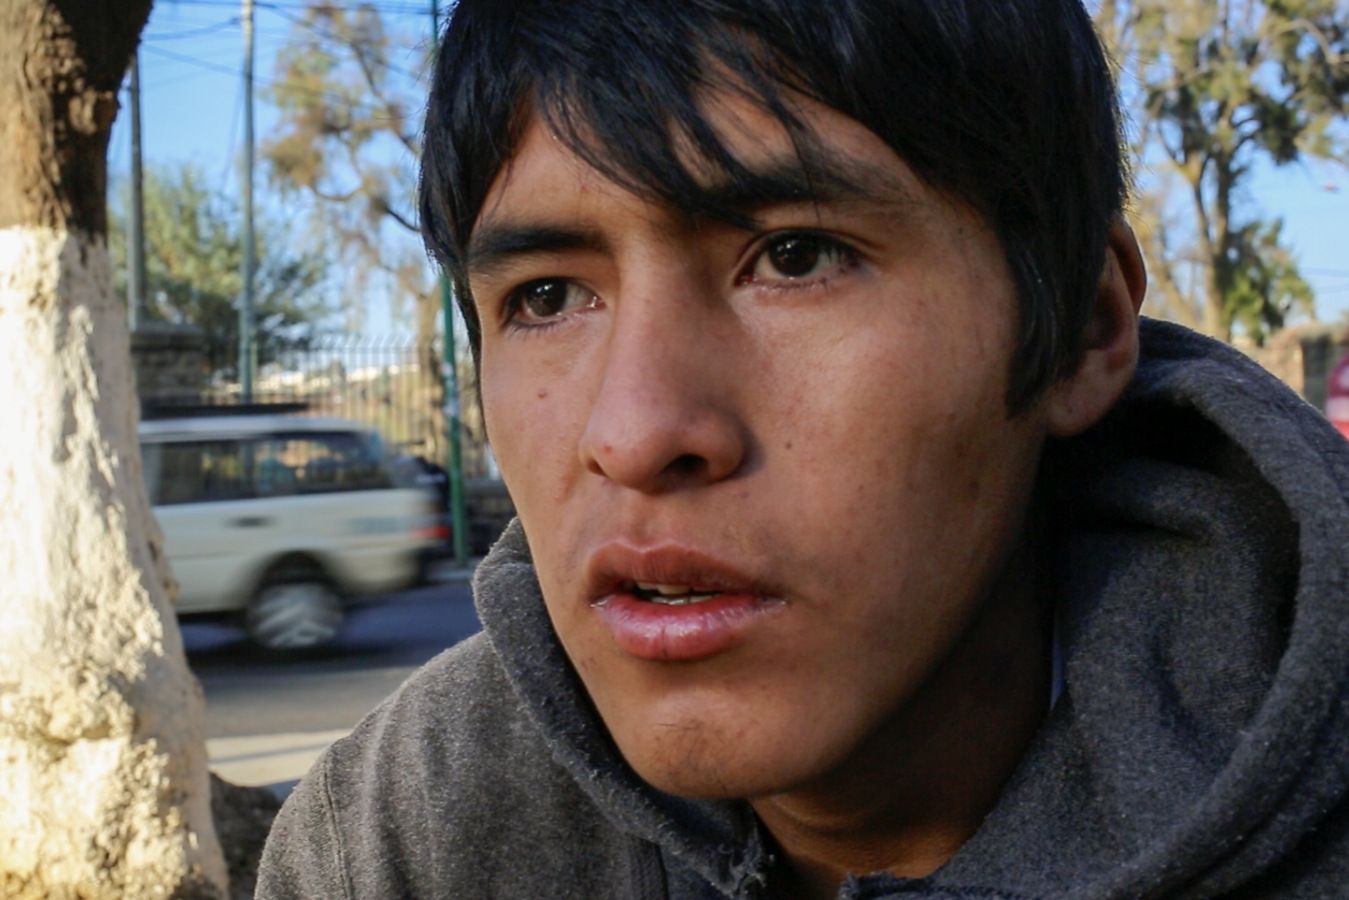 Jonathan Gutierrez, 19, said "family problems" led him to drugs. "I smoke cocaine, pot. I sniff glue, gasoline, everything. I get derailed. I get back on track, then I fall off again." Image by Tracey Eaton. Bolivia, 2017.